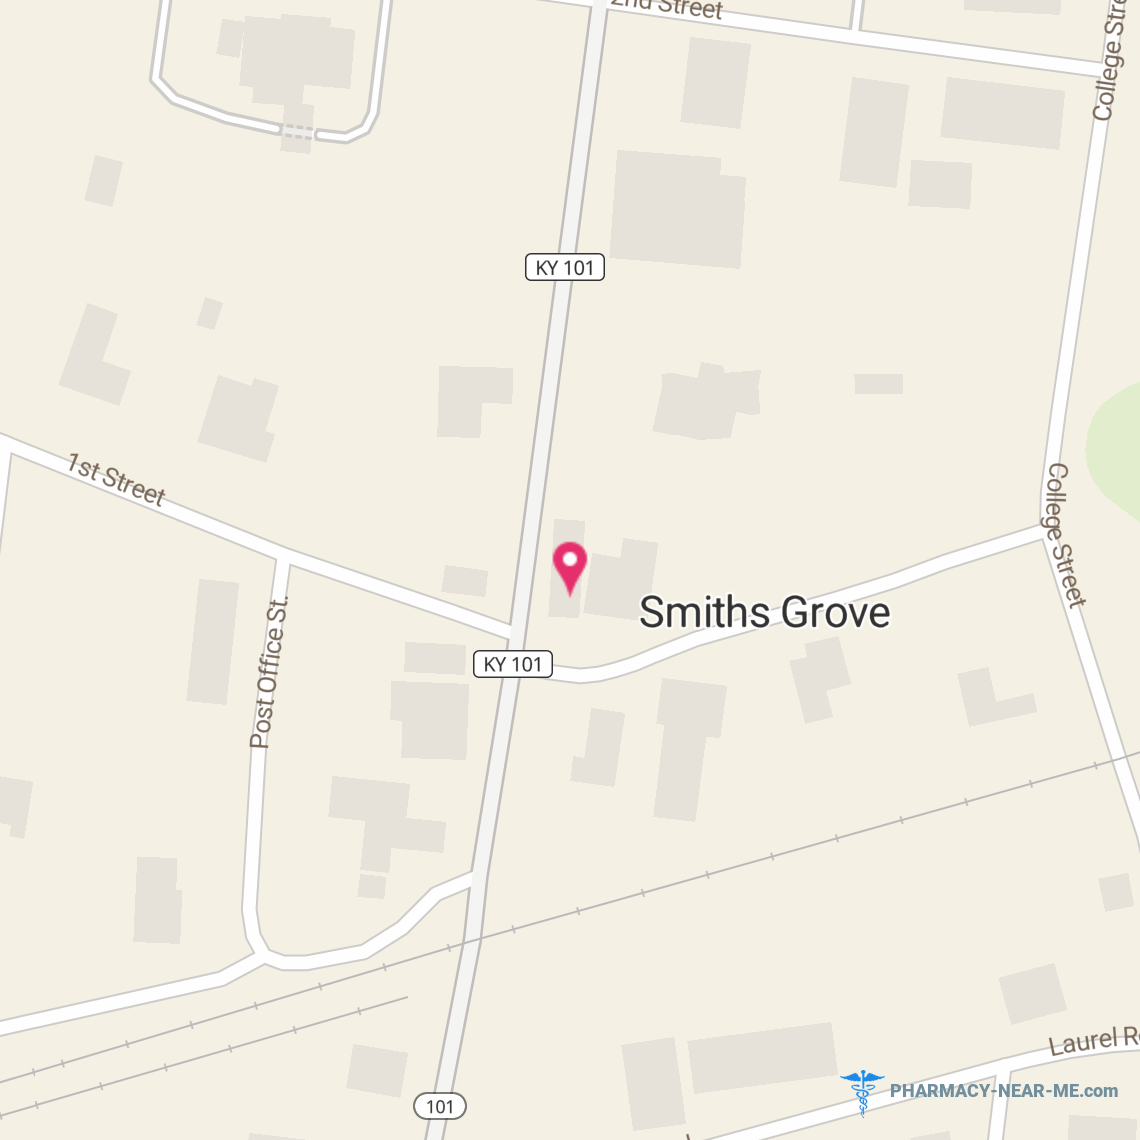 SMITHS GROVE RX SHOP - Pharmacy Hours, Phone, Reviews & Information: 111 North Main Street, Smiths Grove, Kentucky 42171, United States